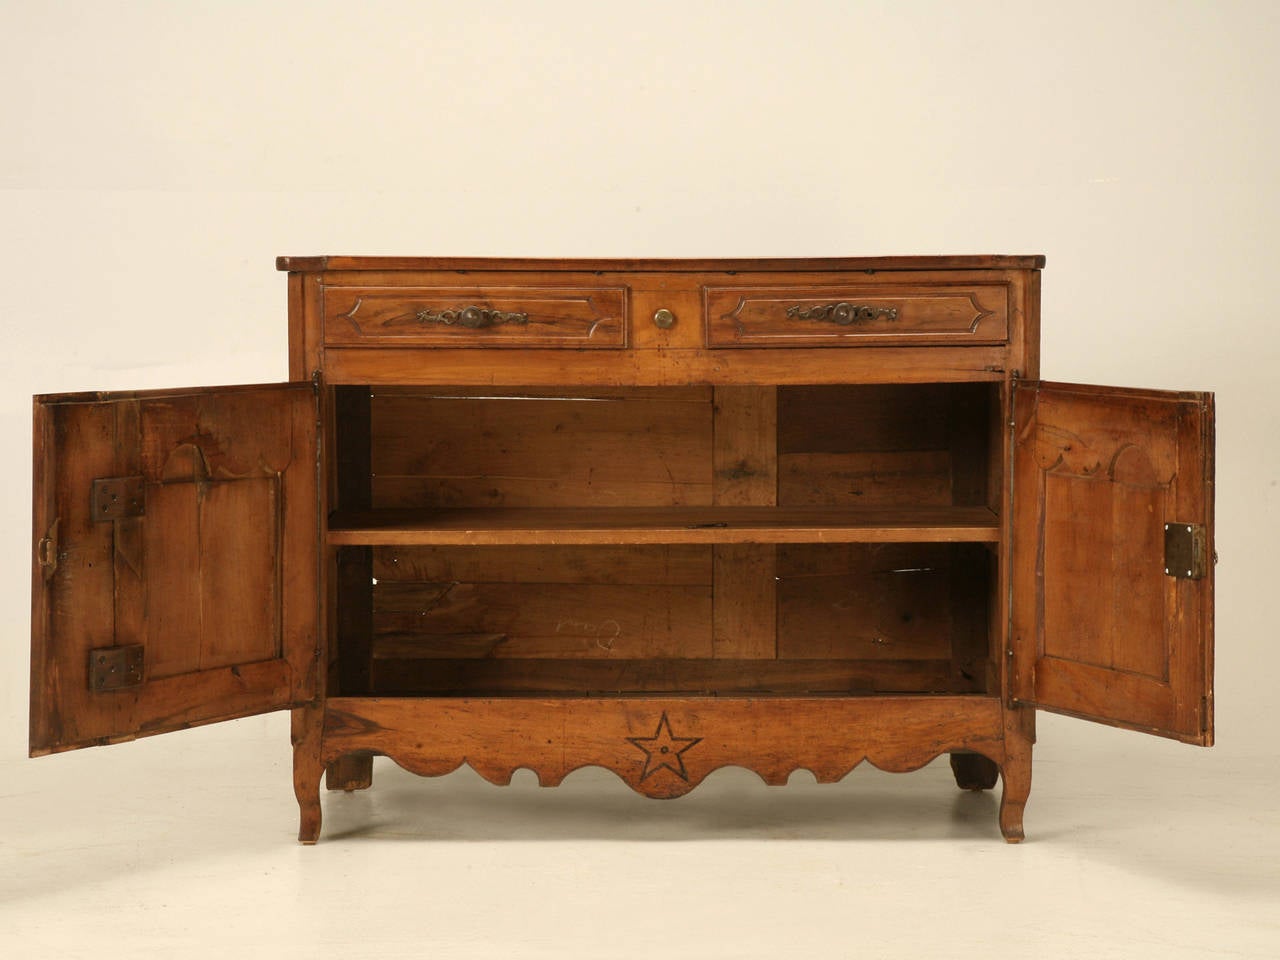 Antique French Antique Buffet with Star and Diamond Motif From Directoire Period 1